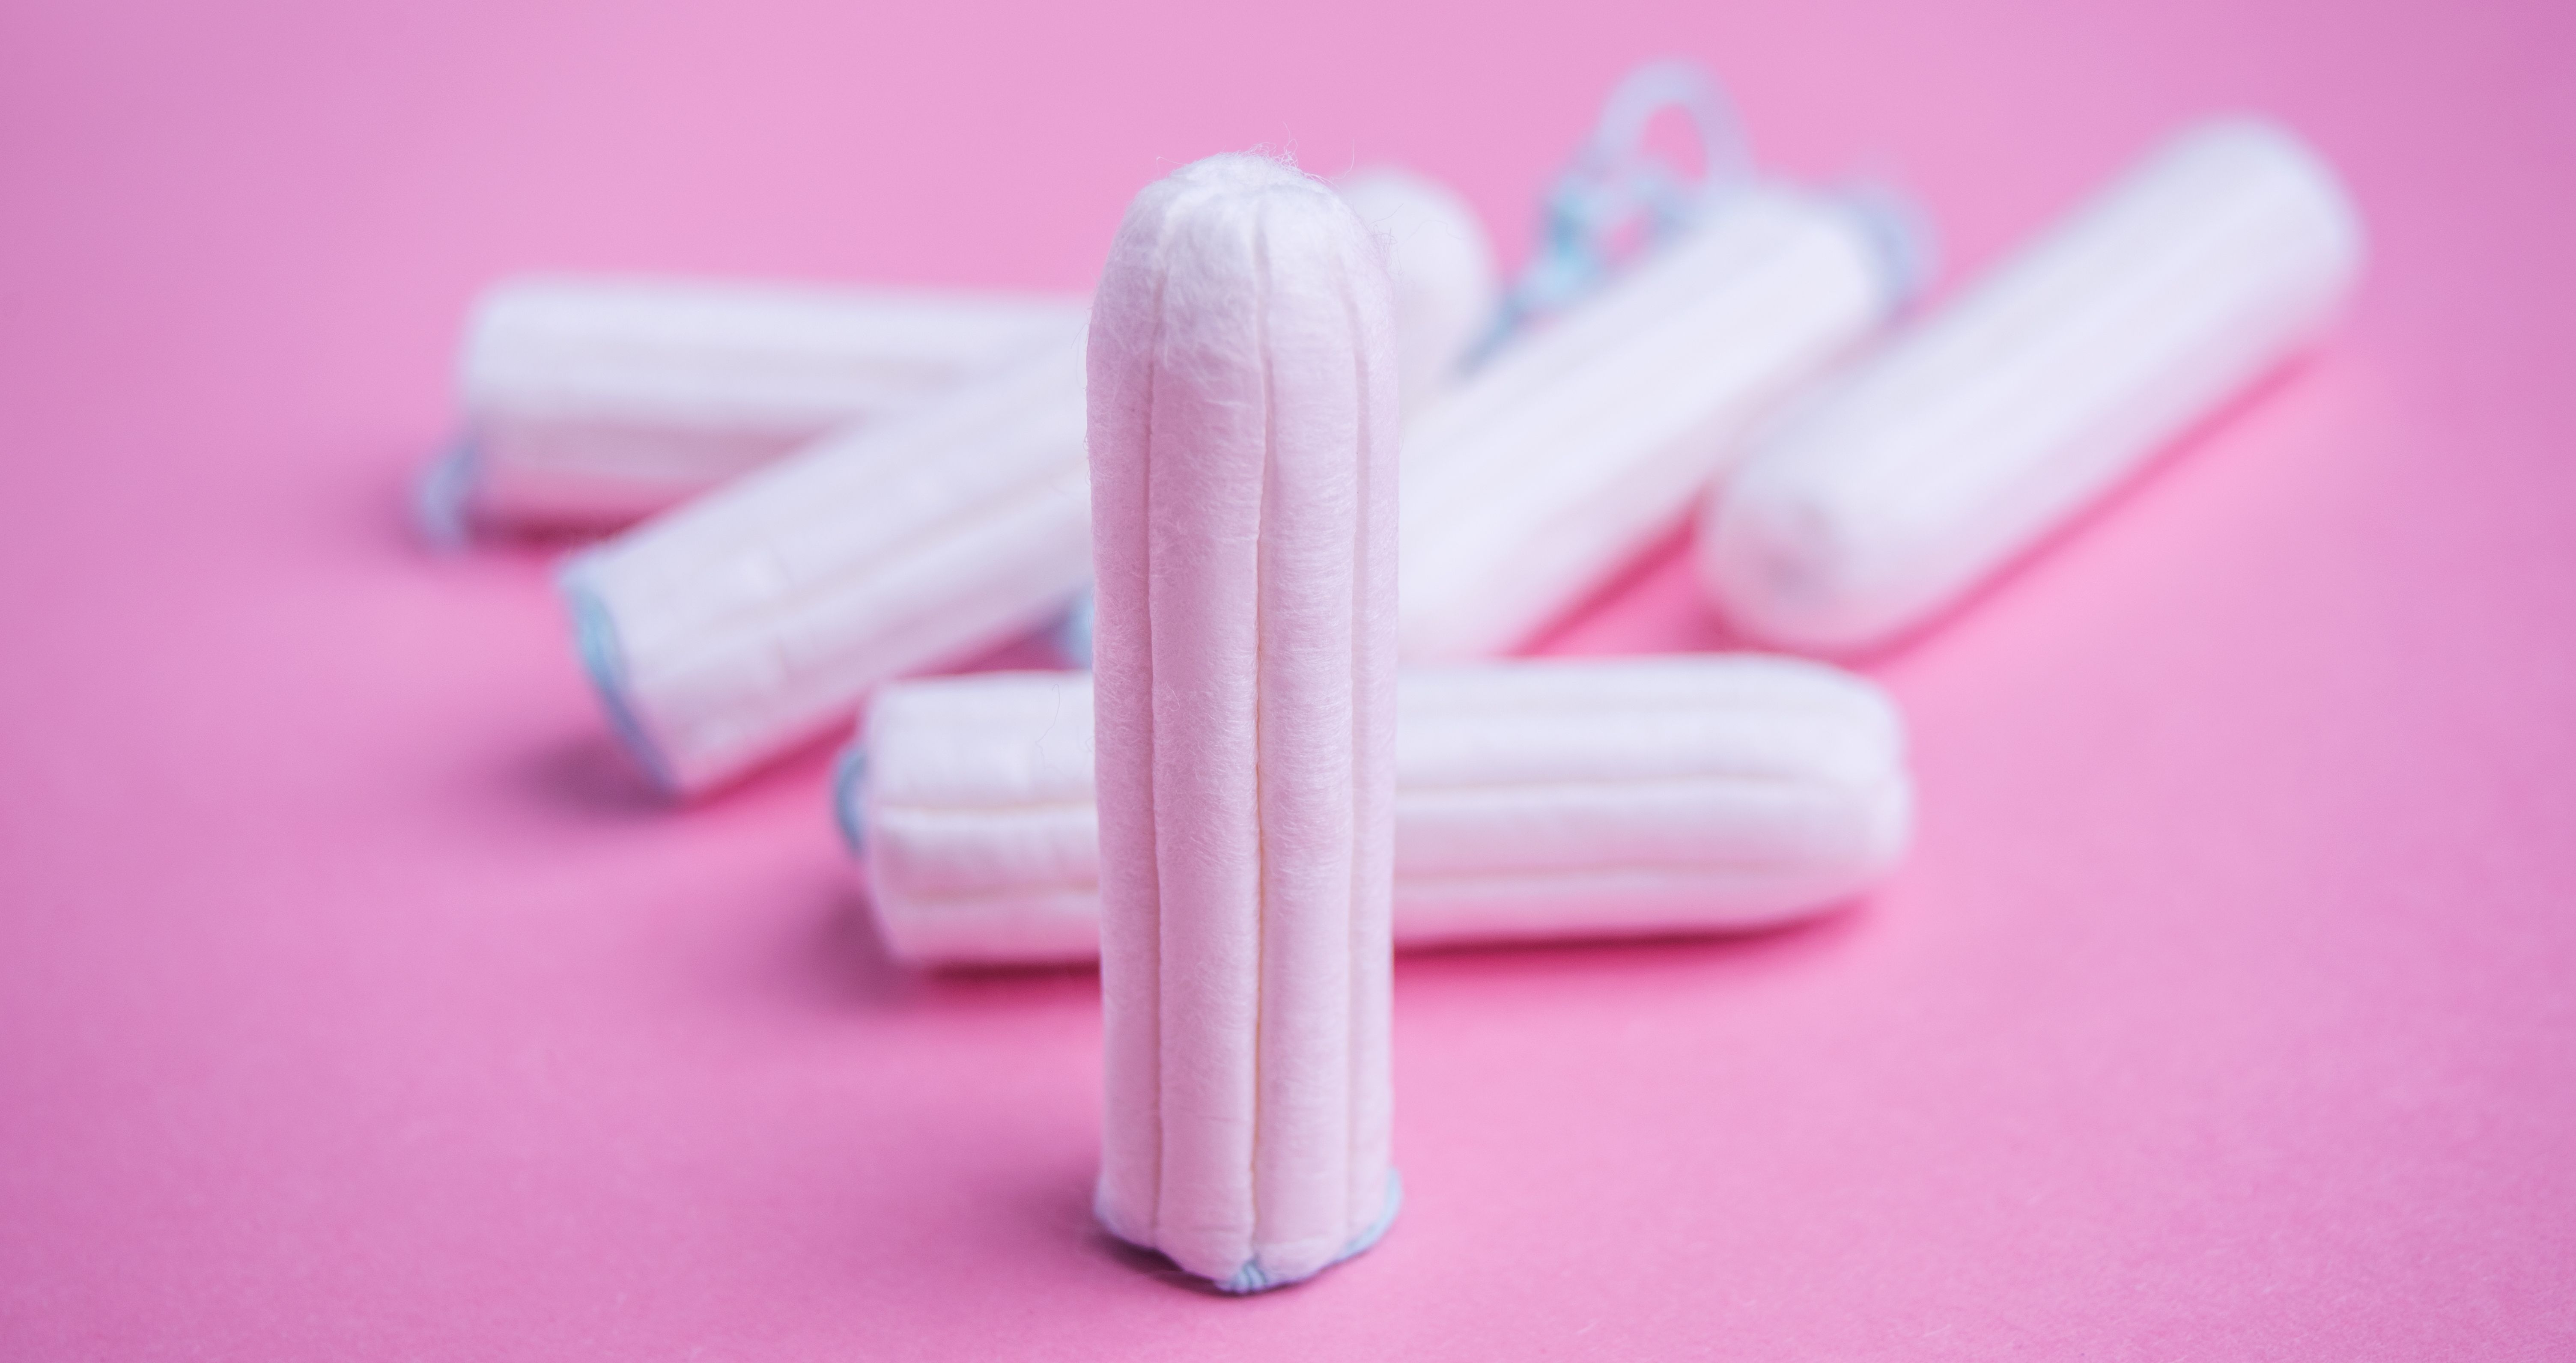 Can You Flush Tampons Down the Toilet? — Women Debate on the Right to Dispose of Tampons